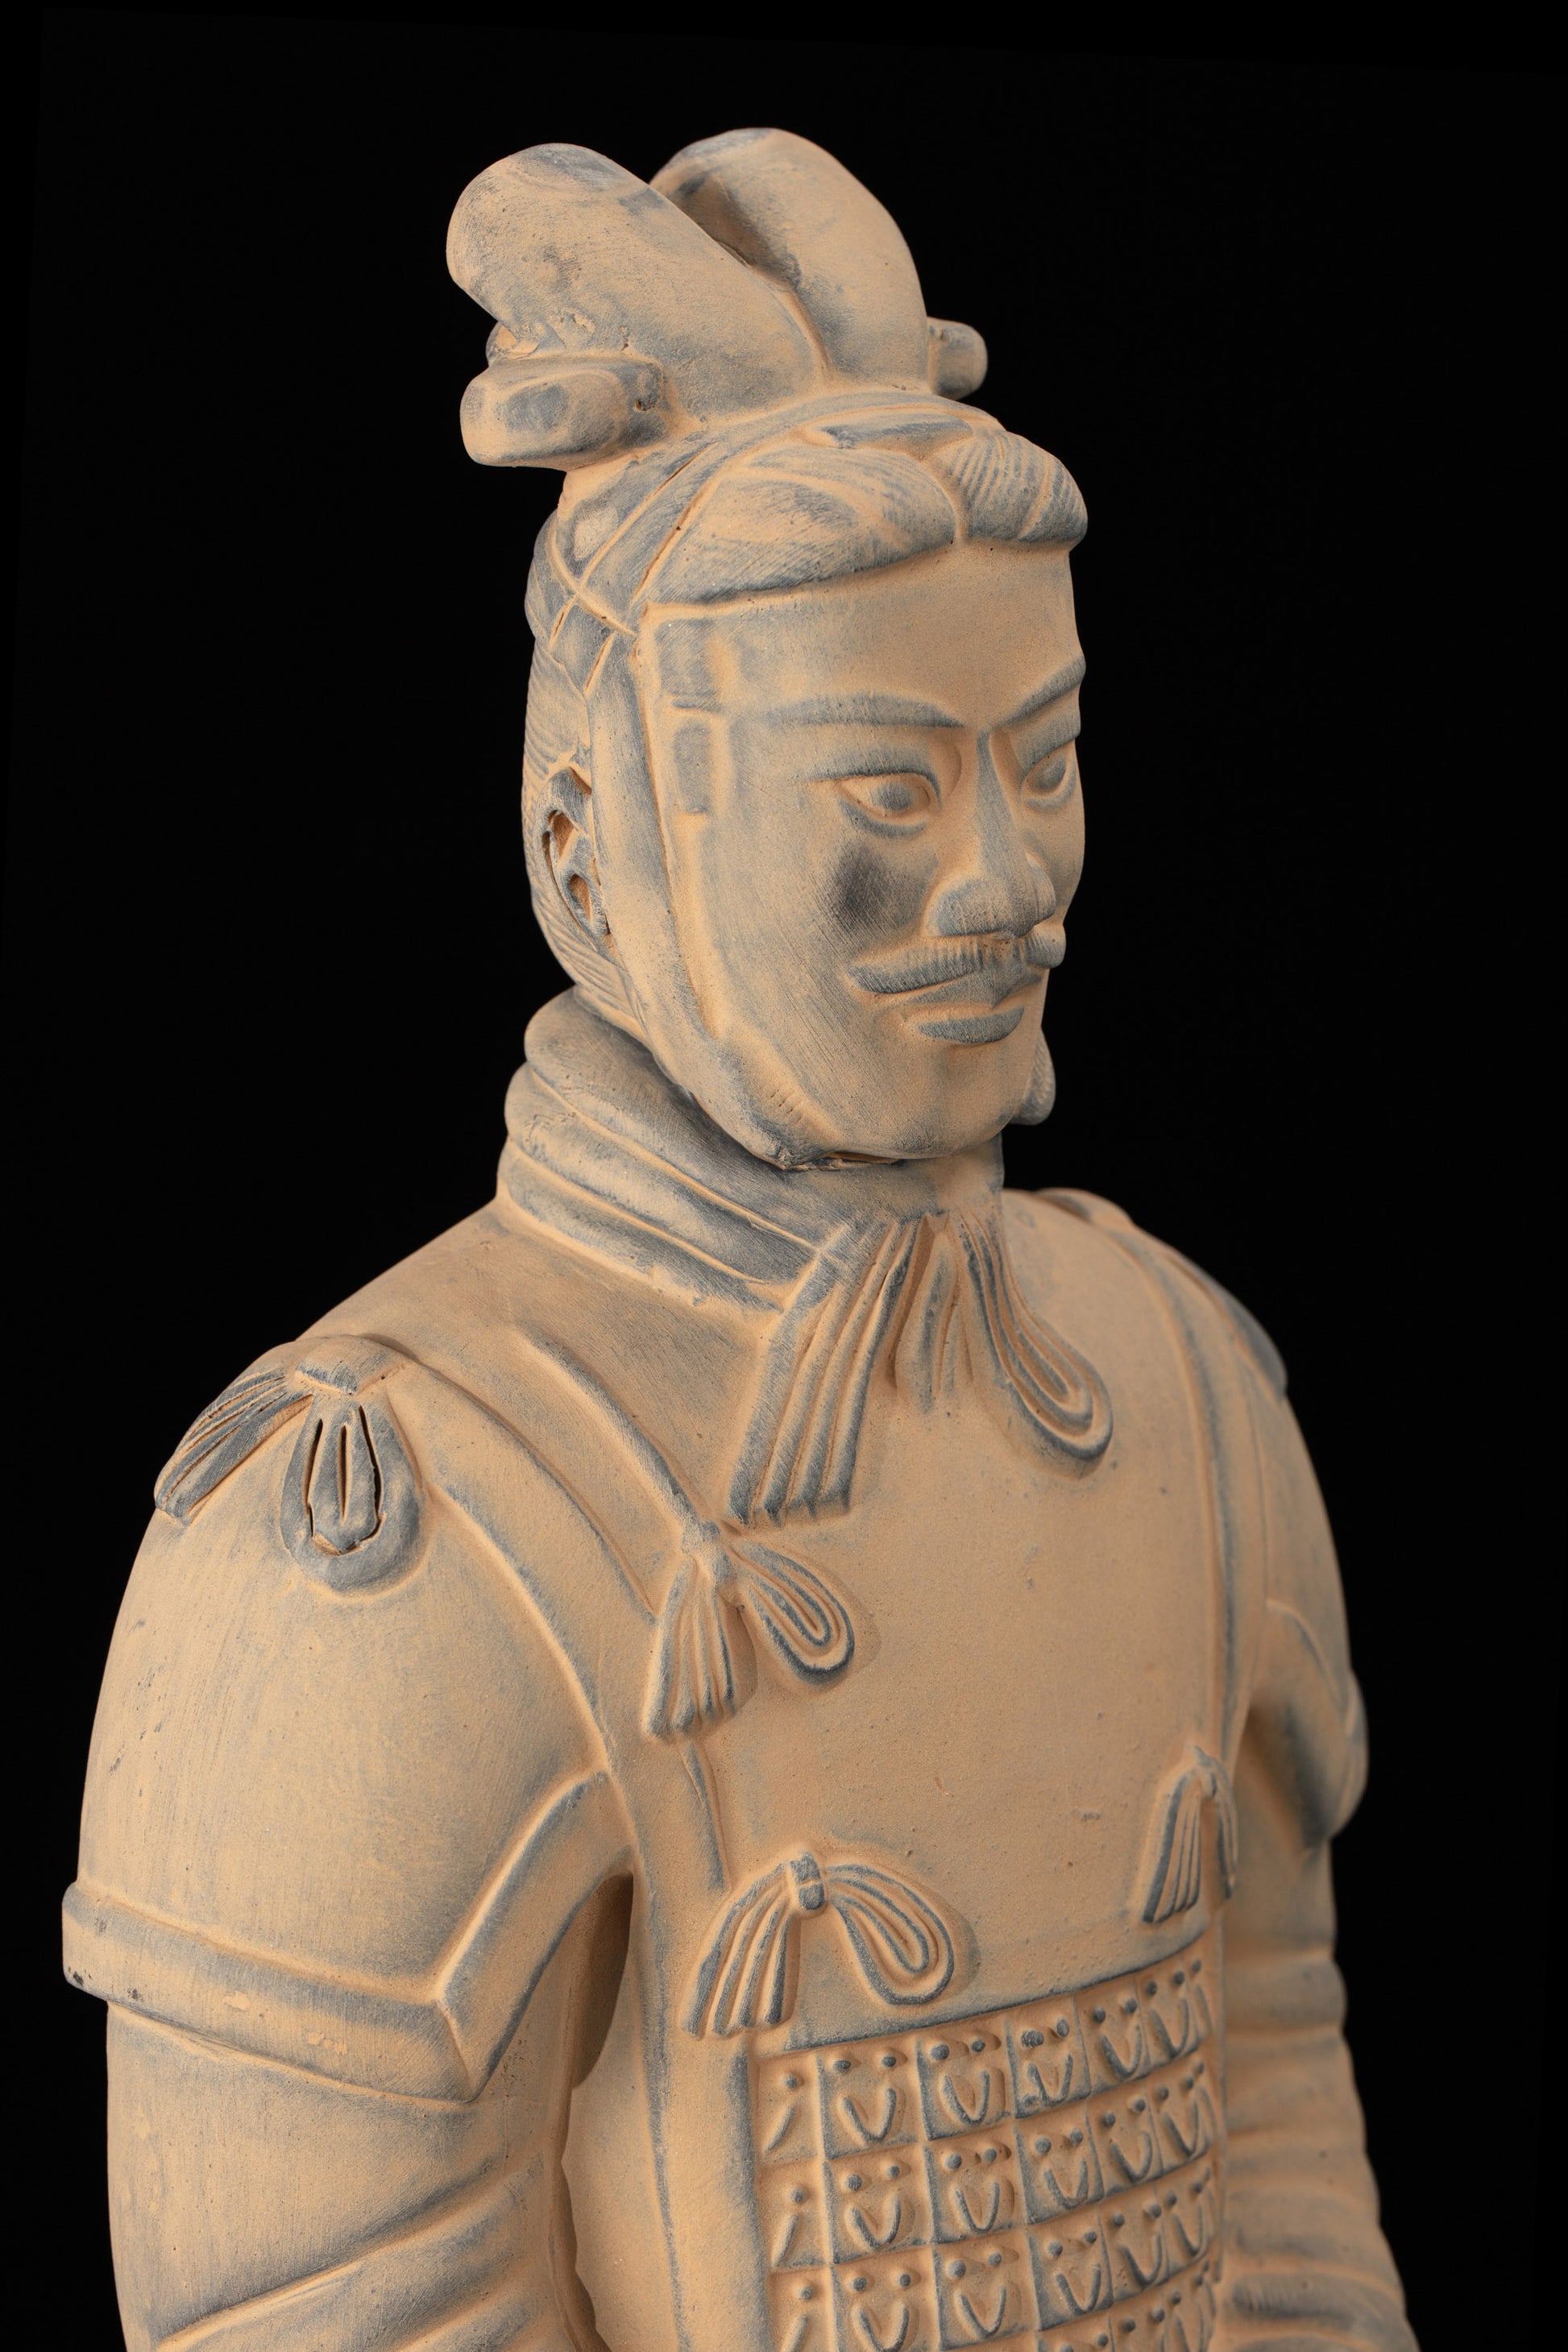 45CM General - CLAYARMY-Historical Uniform Precision: Detailed view of the 45CM General's historically accurate military garb, with meticulous sculpting paying homage to historical authenticity.